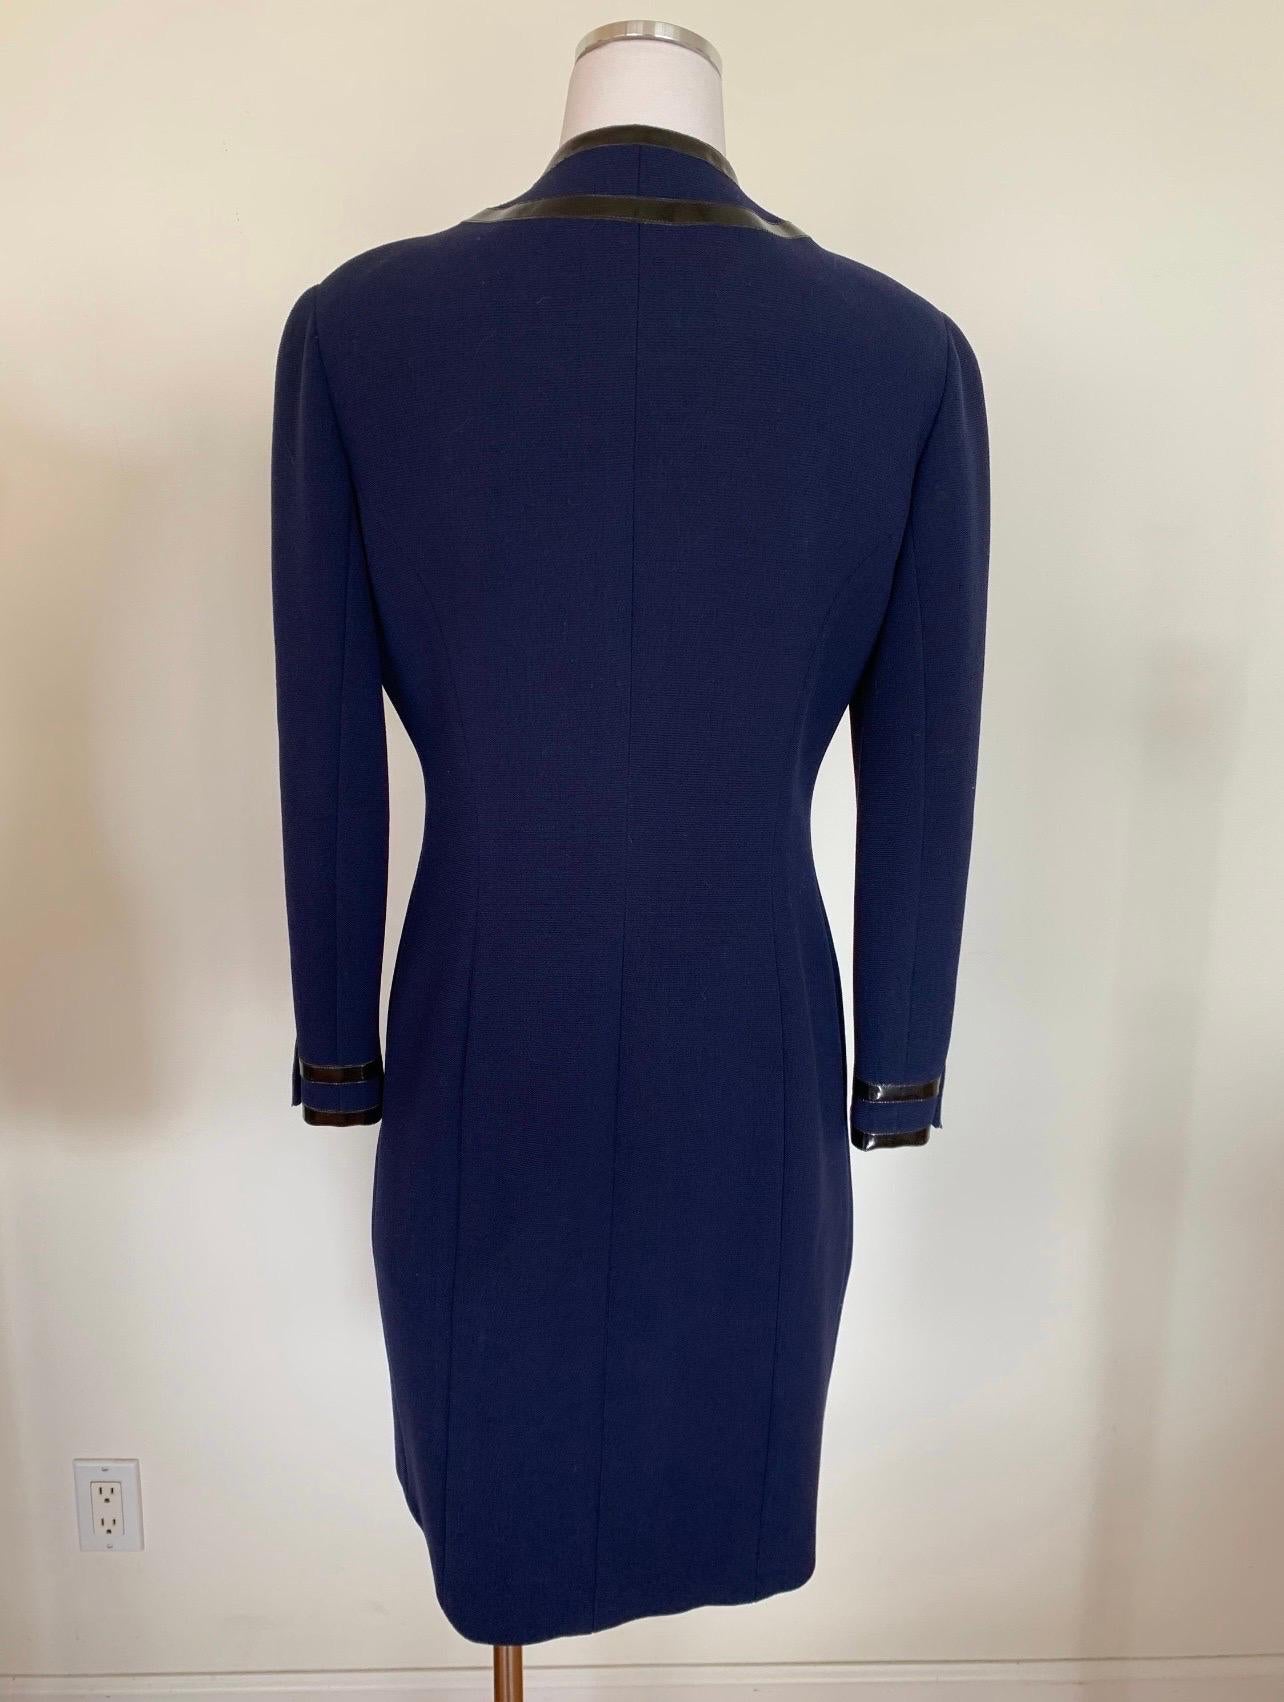 Vintage CHANEL long blue and black wool coat with CC logo buttons In Excellent Condition For Sale In Malibu, CA